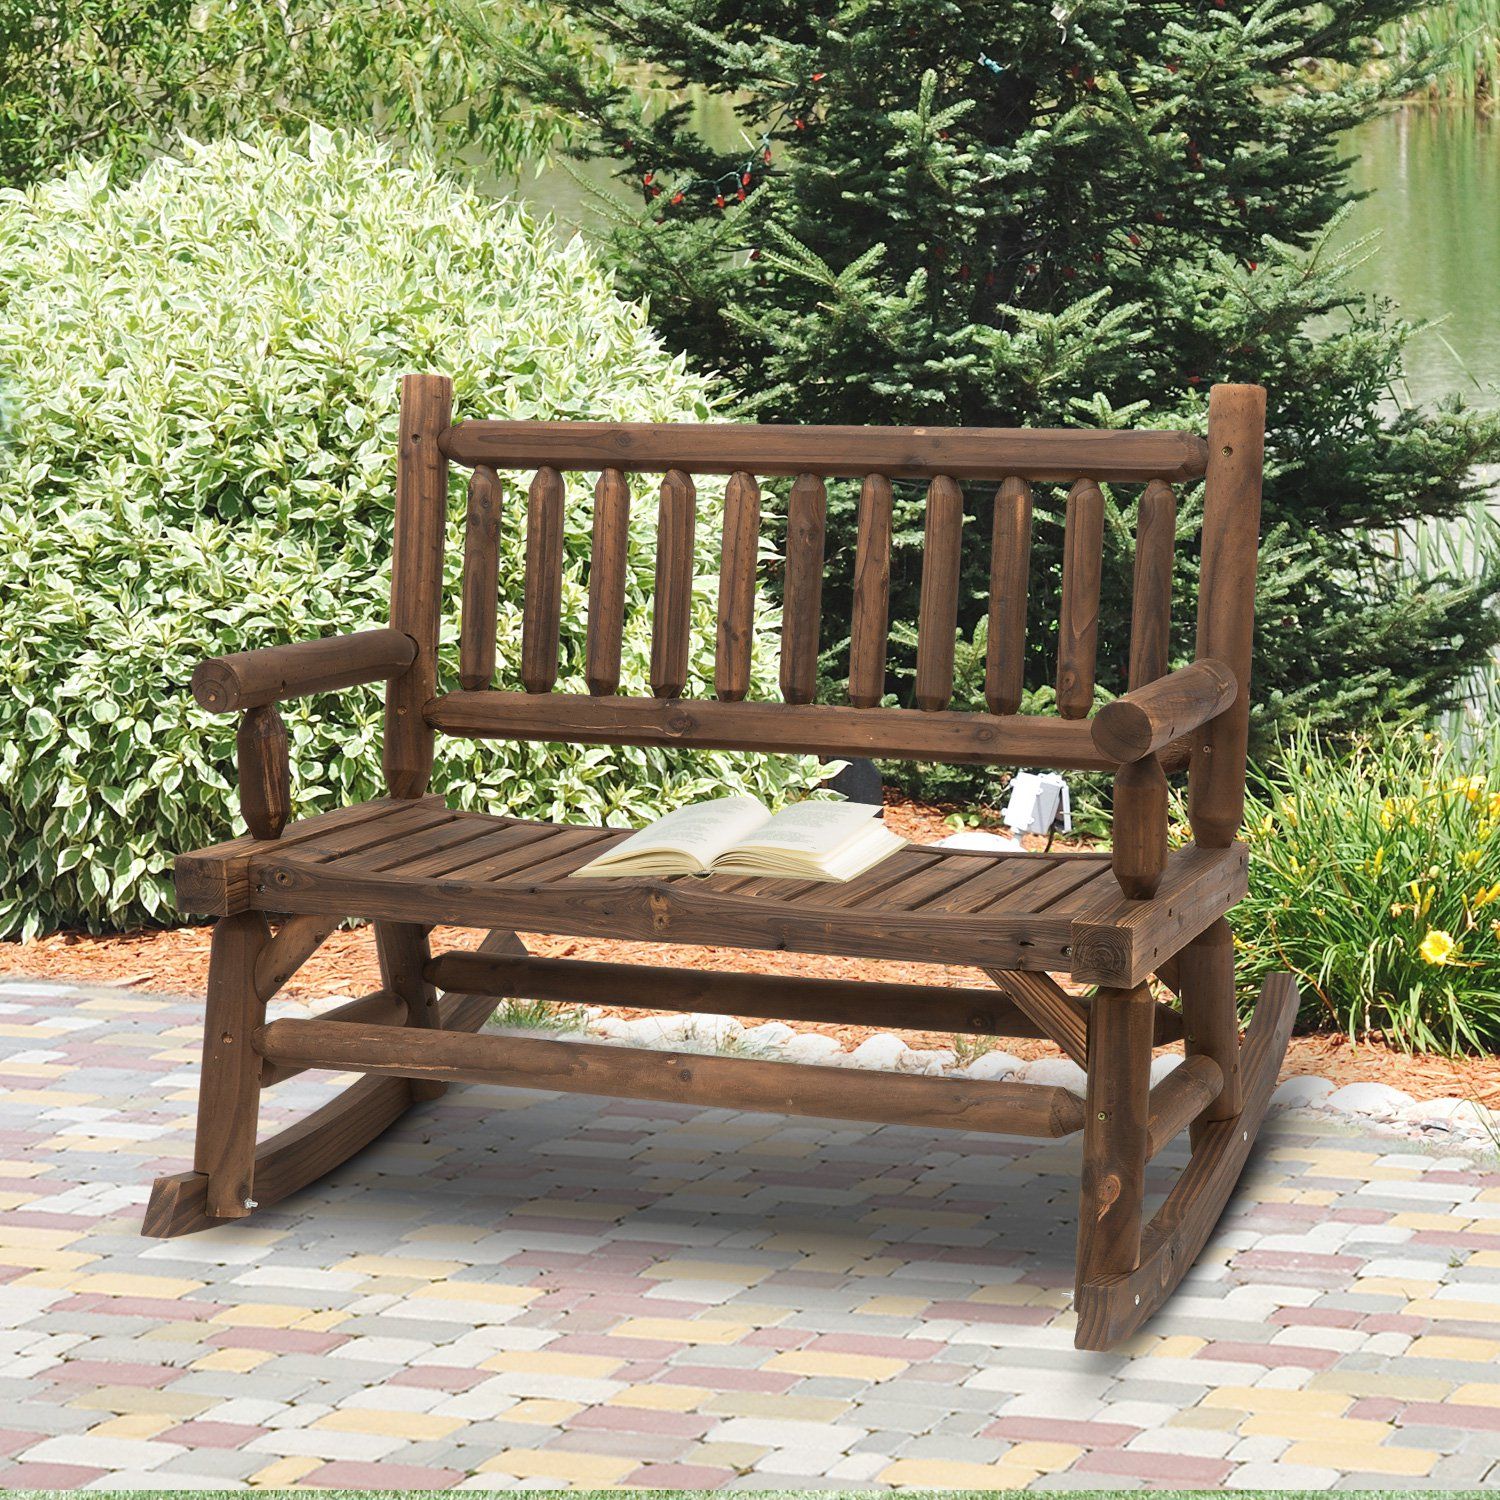 Outsunny Wooden Rocking Chair 2 Person Outdoor Bench With Natural Fir Inside Natural Wood Outdoor Chairs (View 9 of 15)